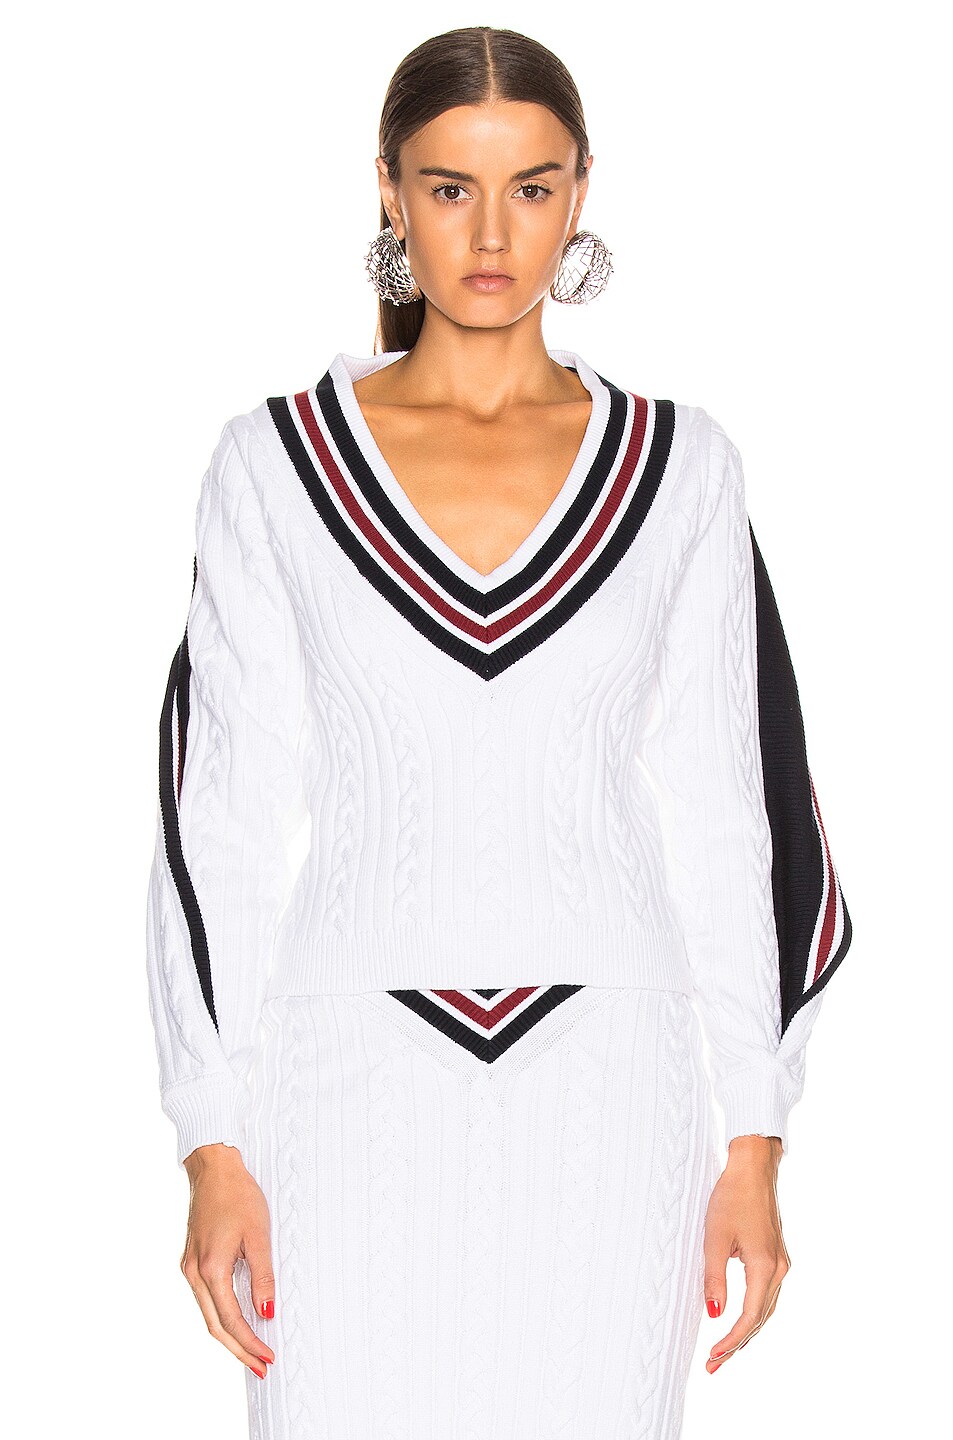 Y/Project V Neck Sweater in White | FWRD